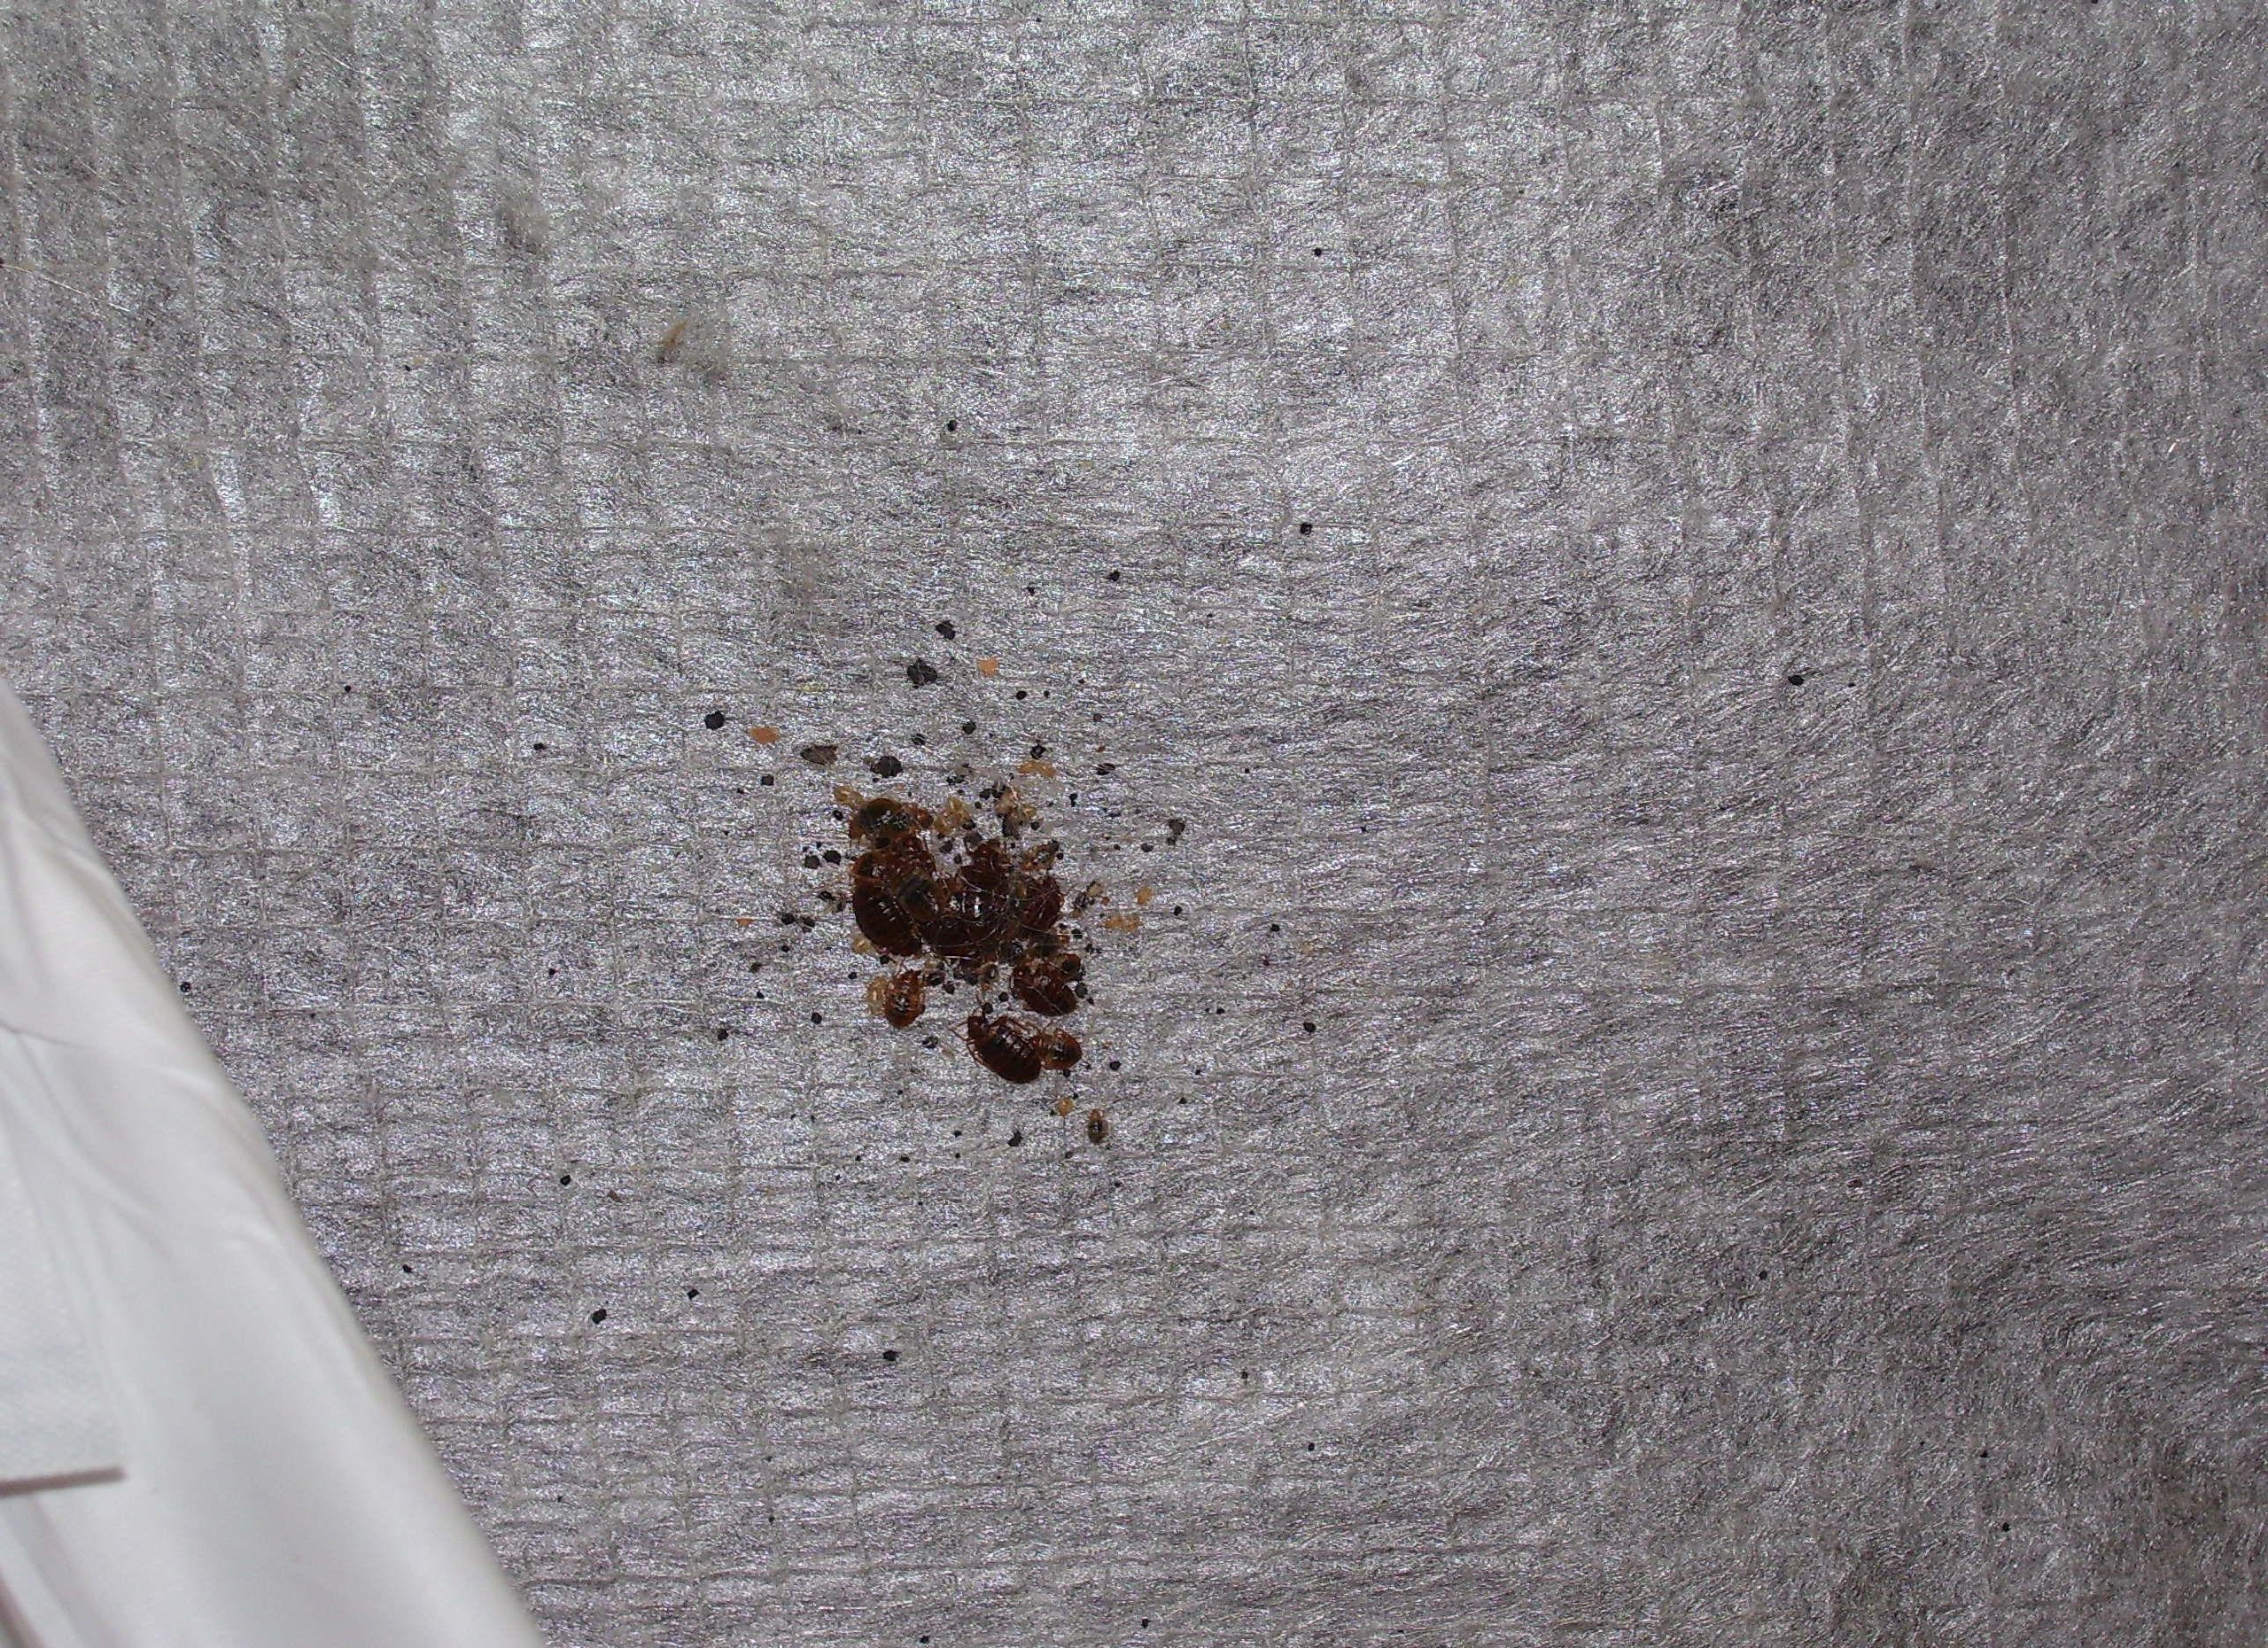 How to Detect Bedbugs - Bed Bug Detection